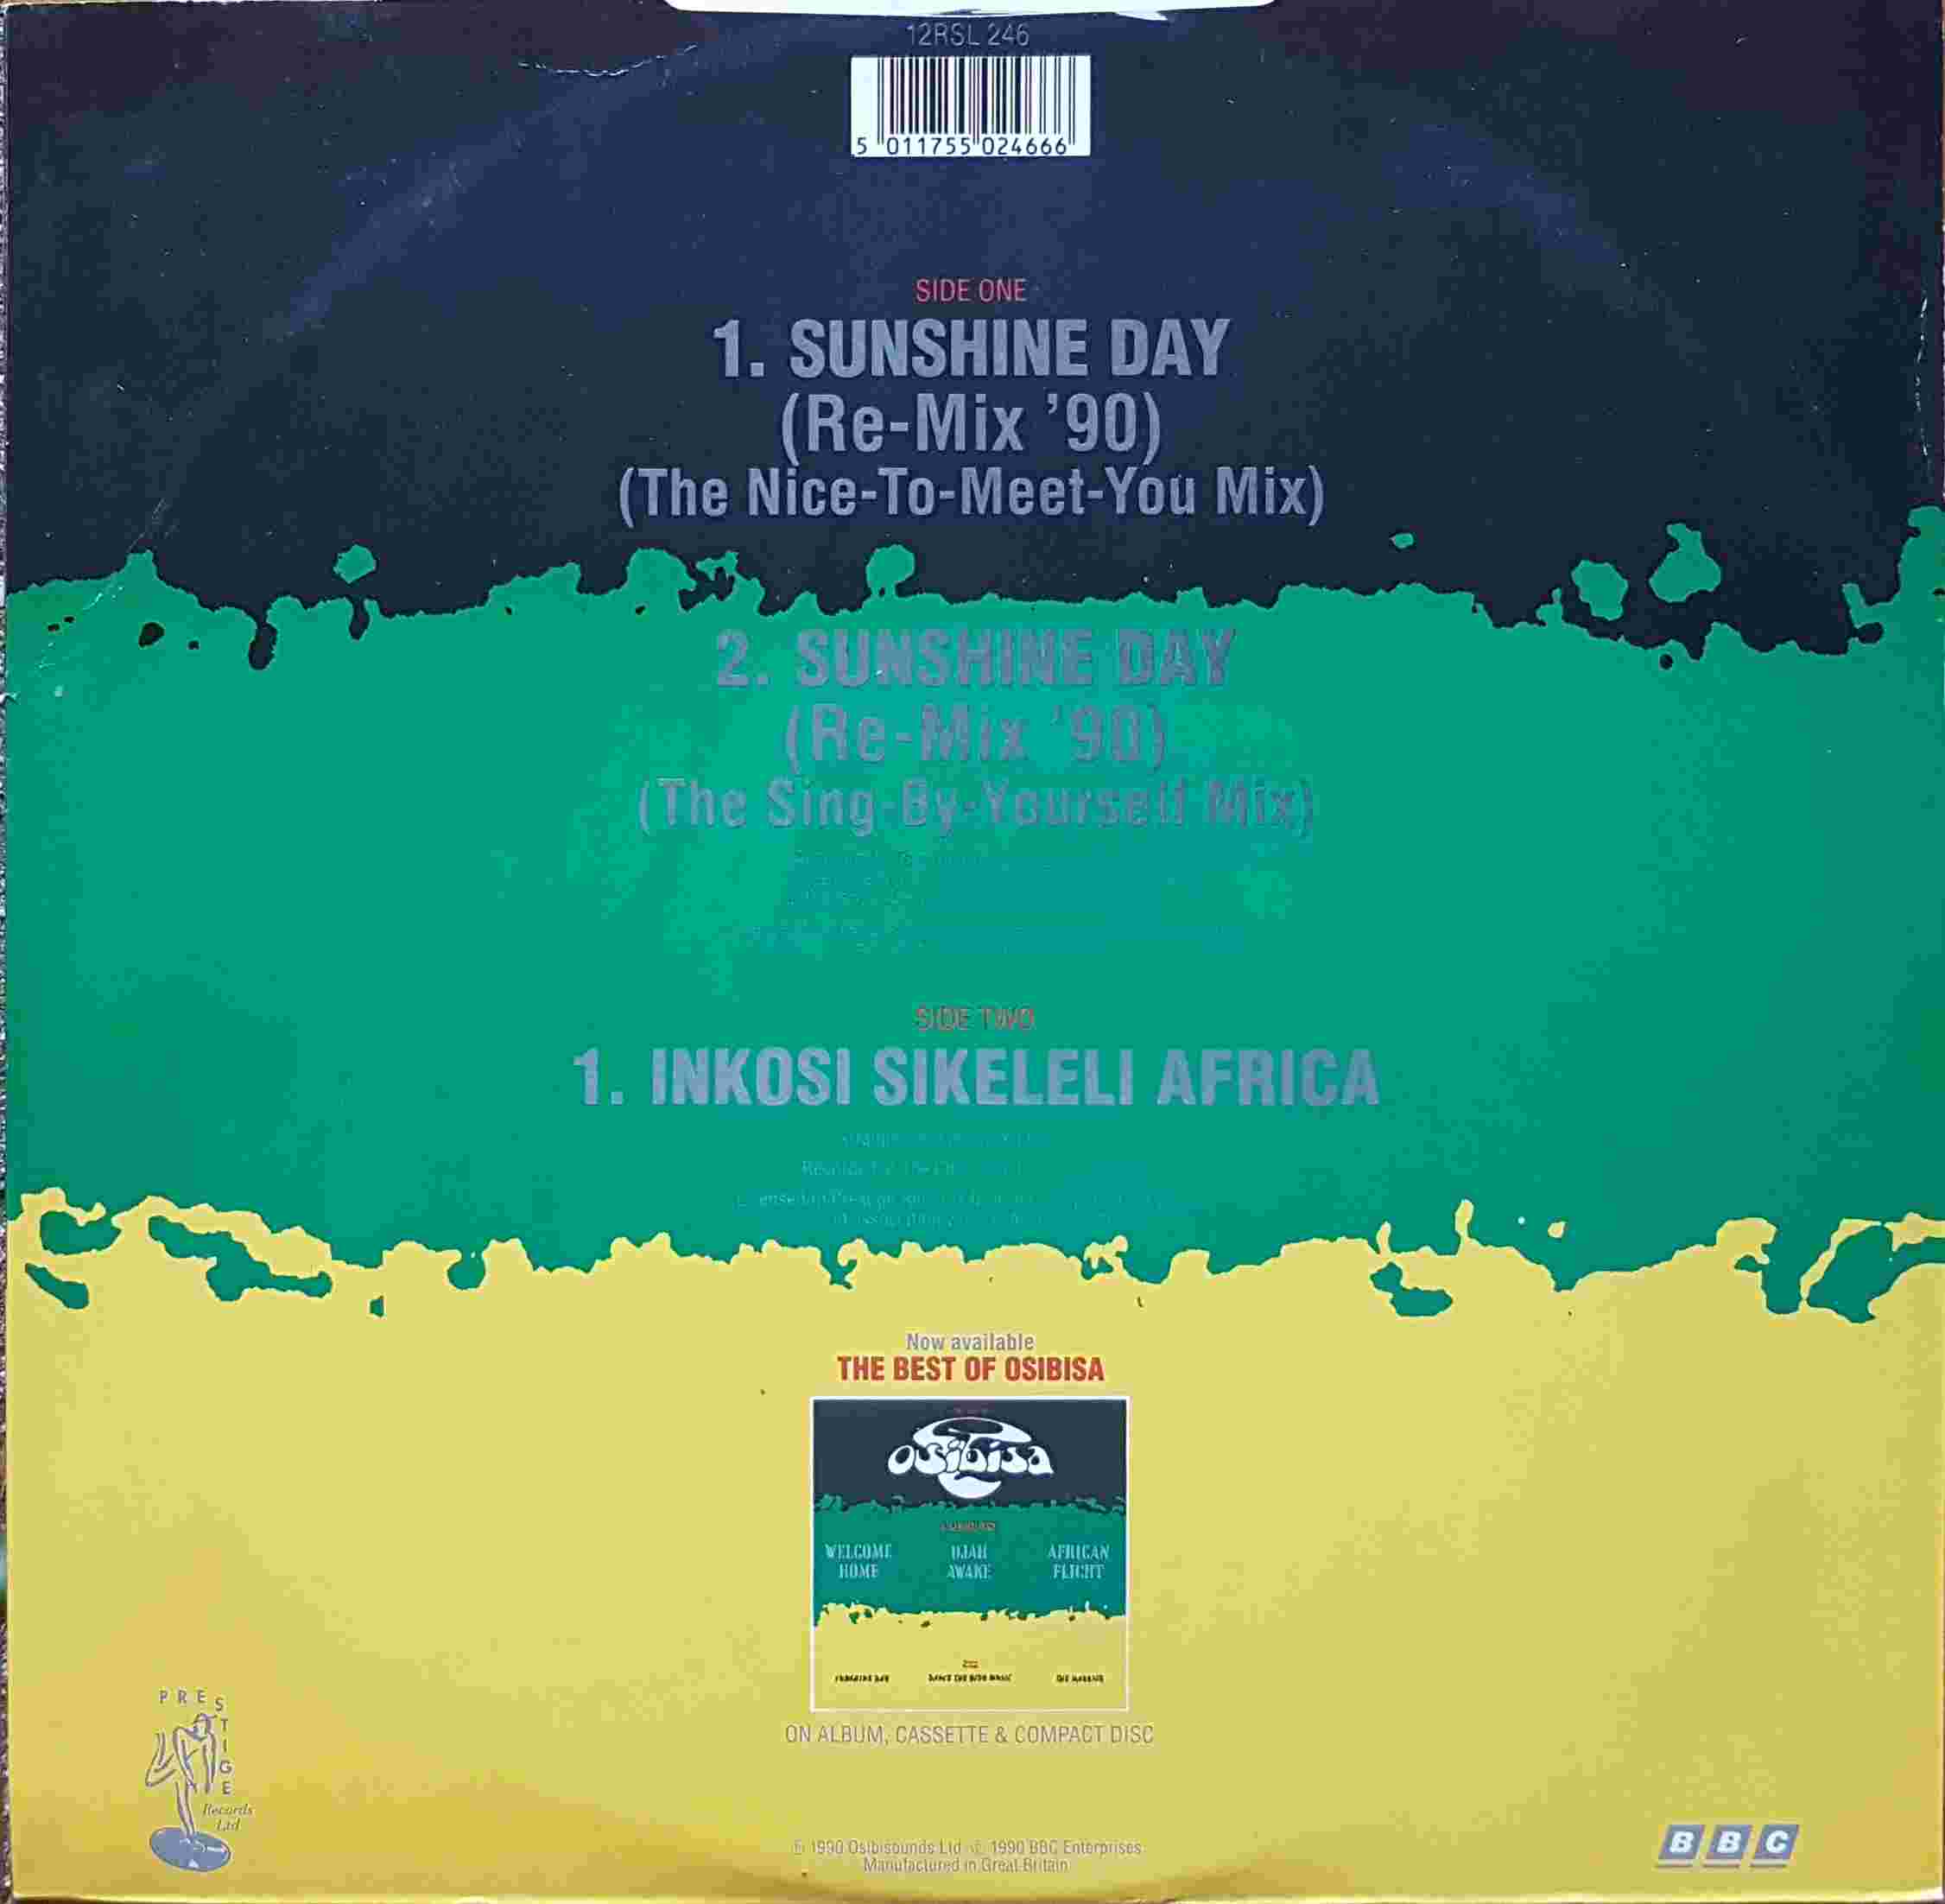 Picture of 12 RSL 246 Sunshine day (The nice-to-meet-you mix) by artist Osei / Tontoh / Amarifo from the BBC records and Tapes library